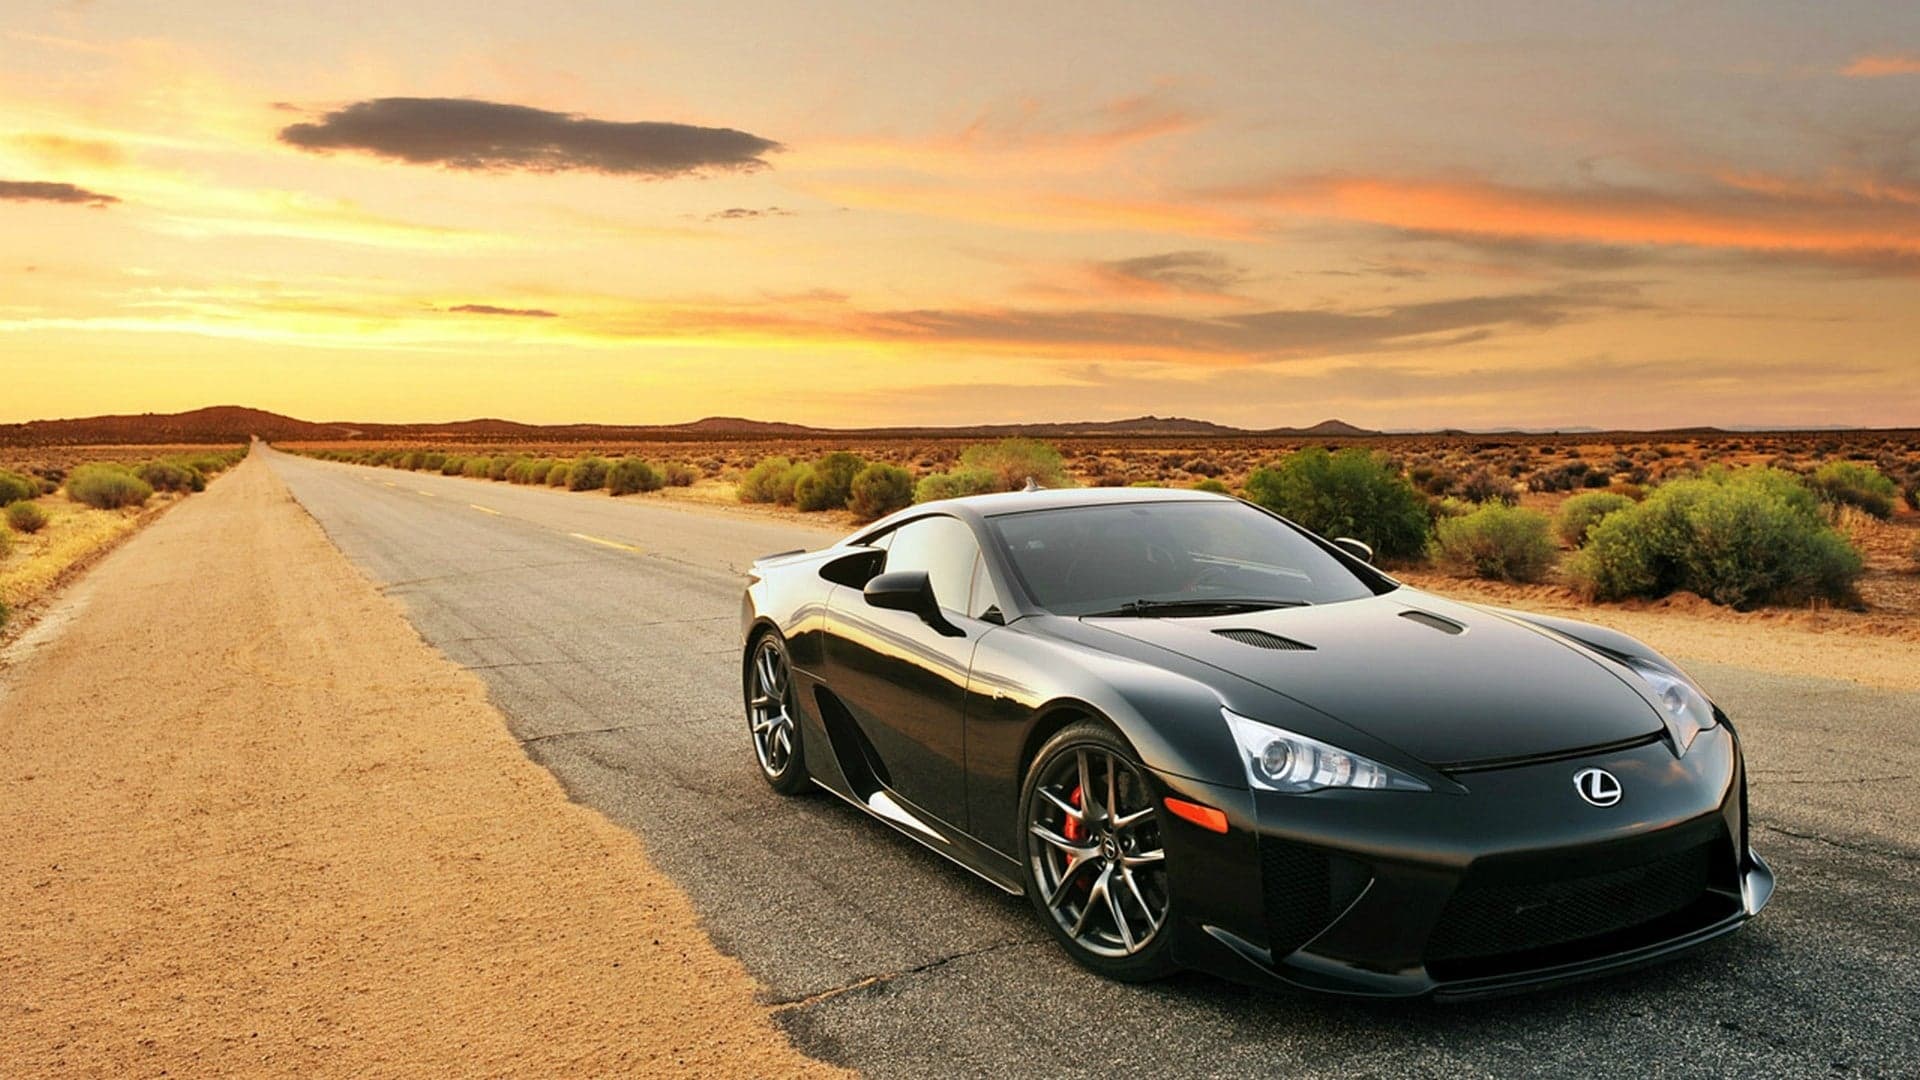 There’s A 356-Mile Lexus LFA for Sale in Ohio